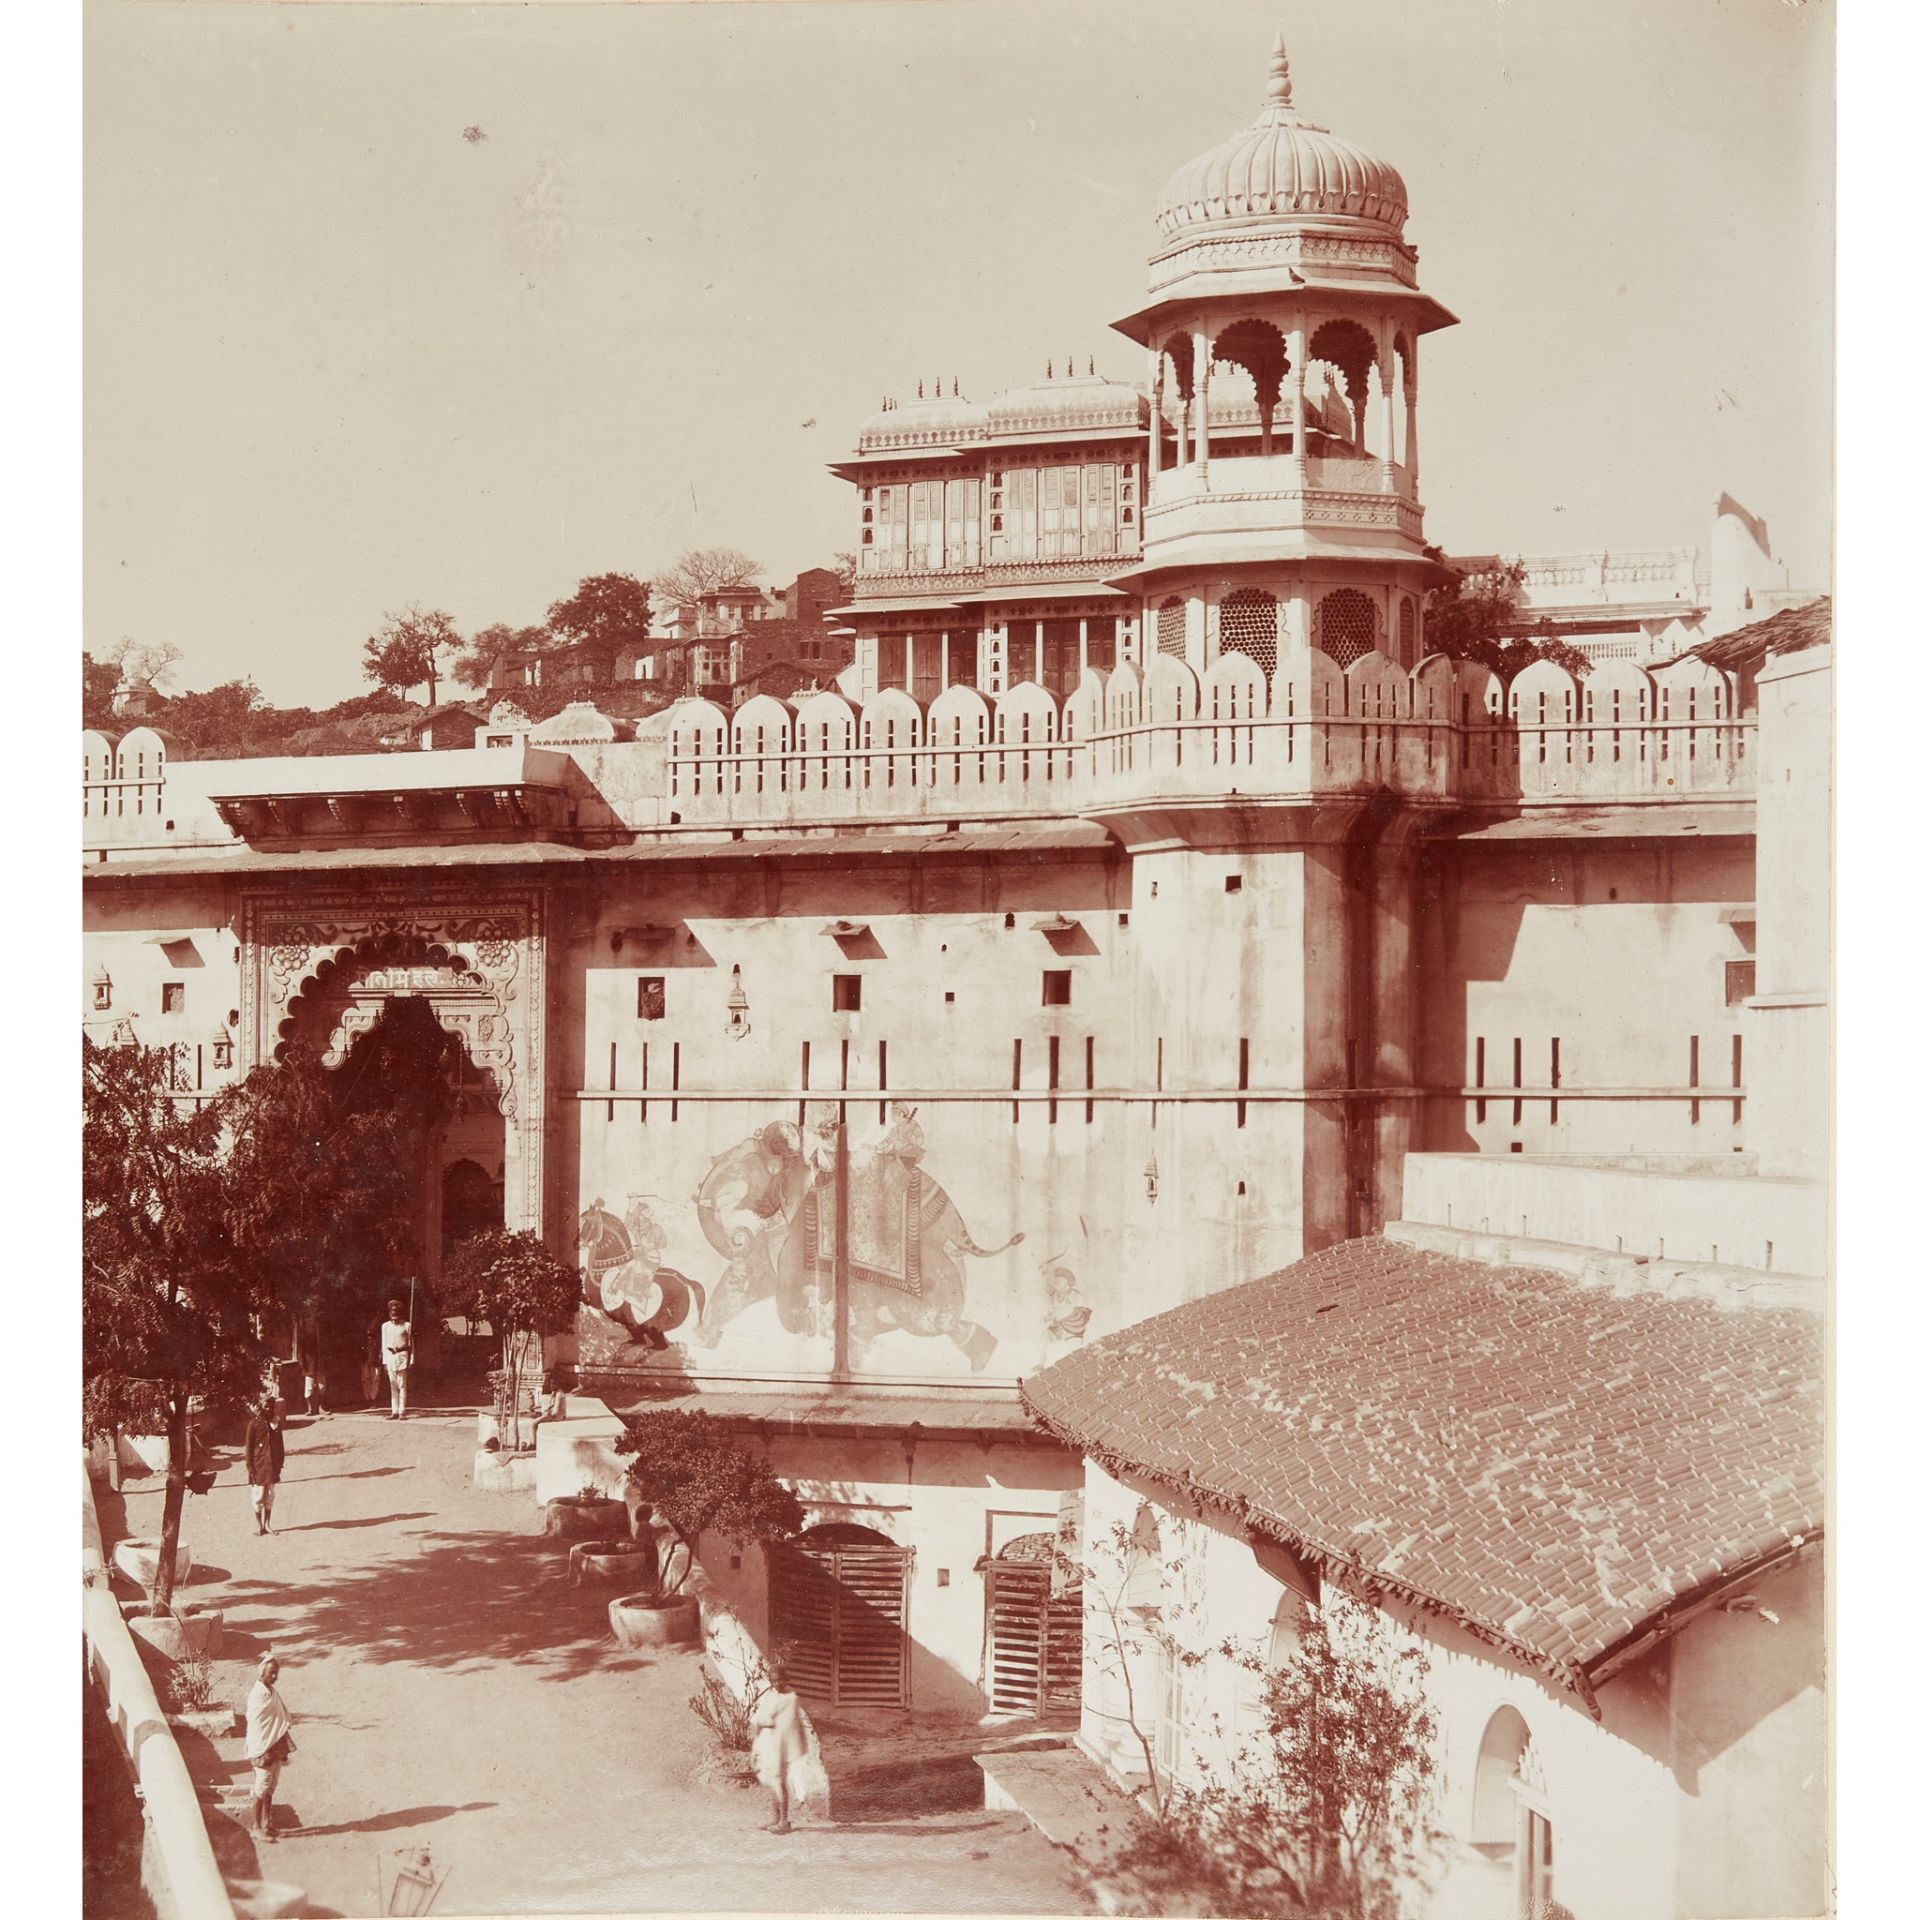 India: a photograph album Photographs of Rajasthan by Mohan Lal of Udaipur, late 19th century - Image 4 of 23